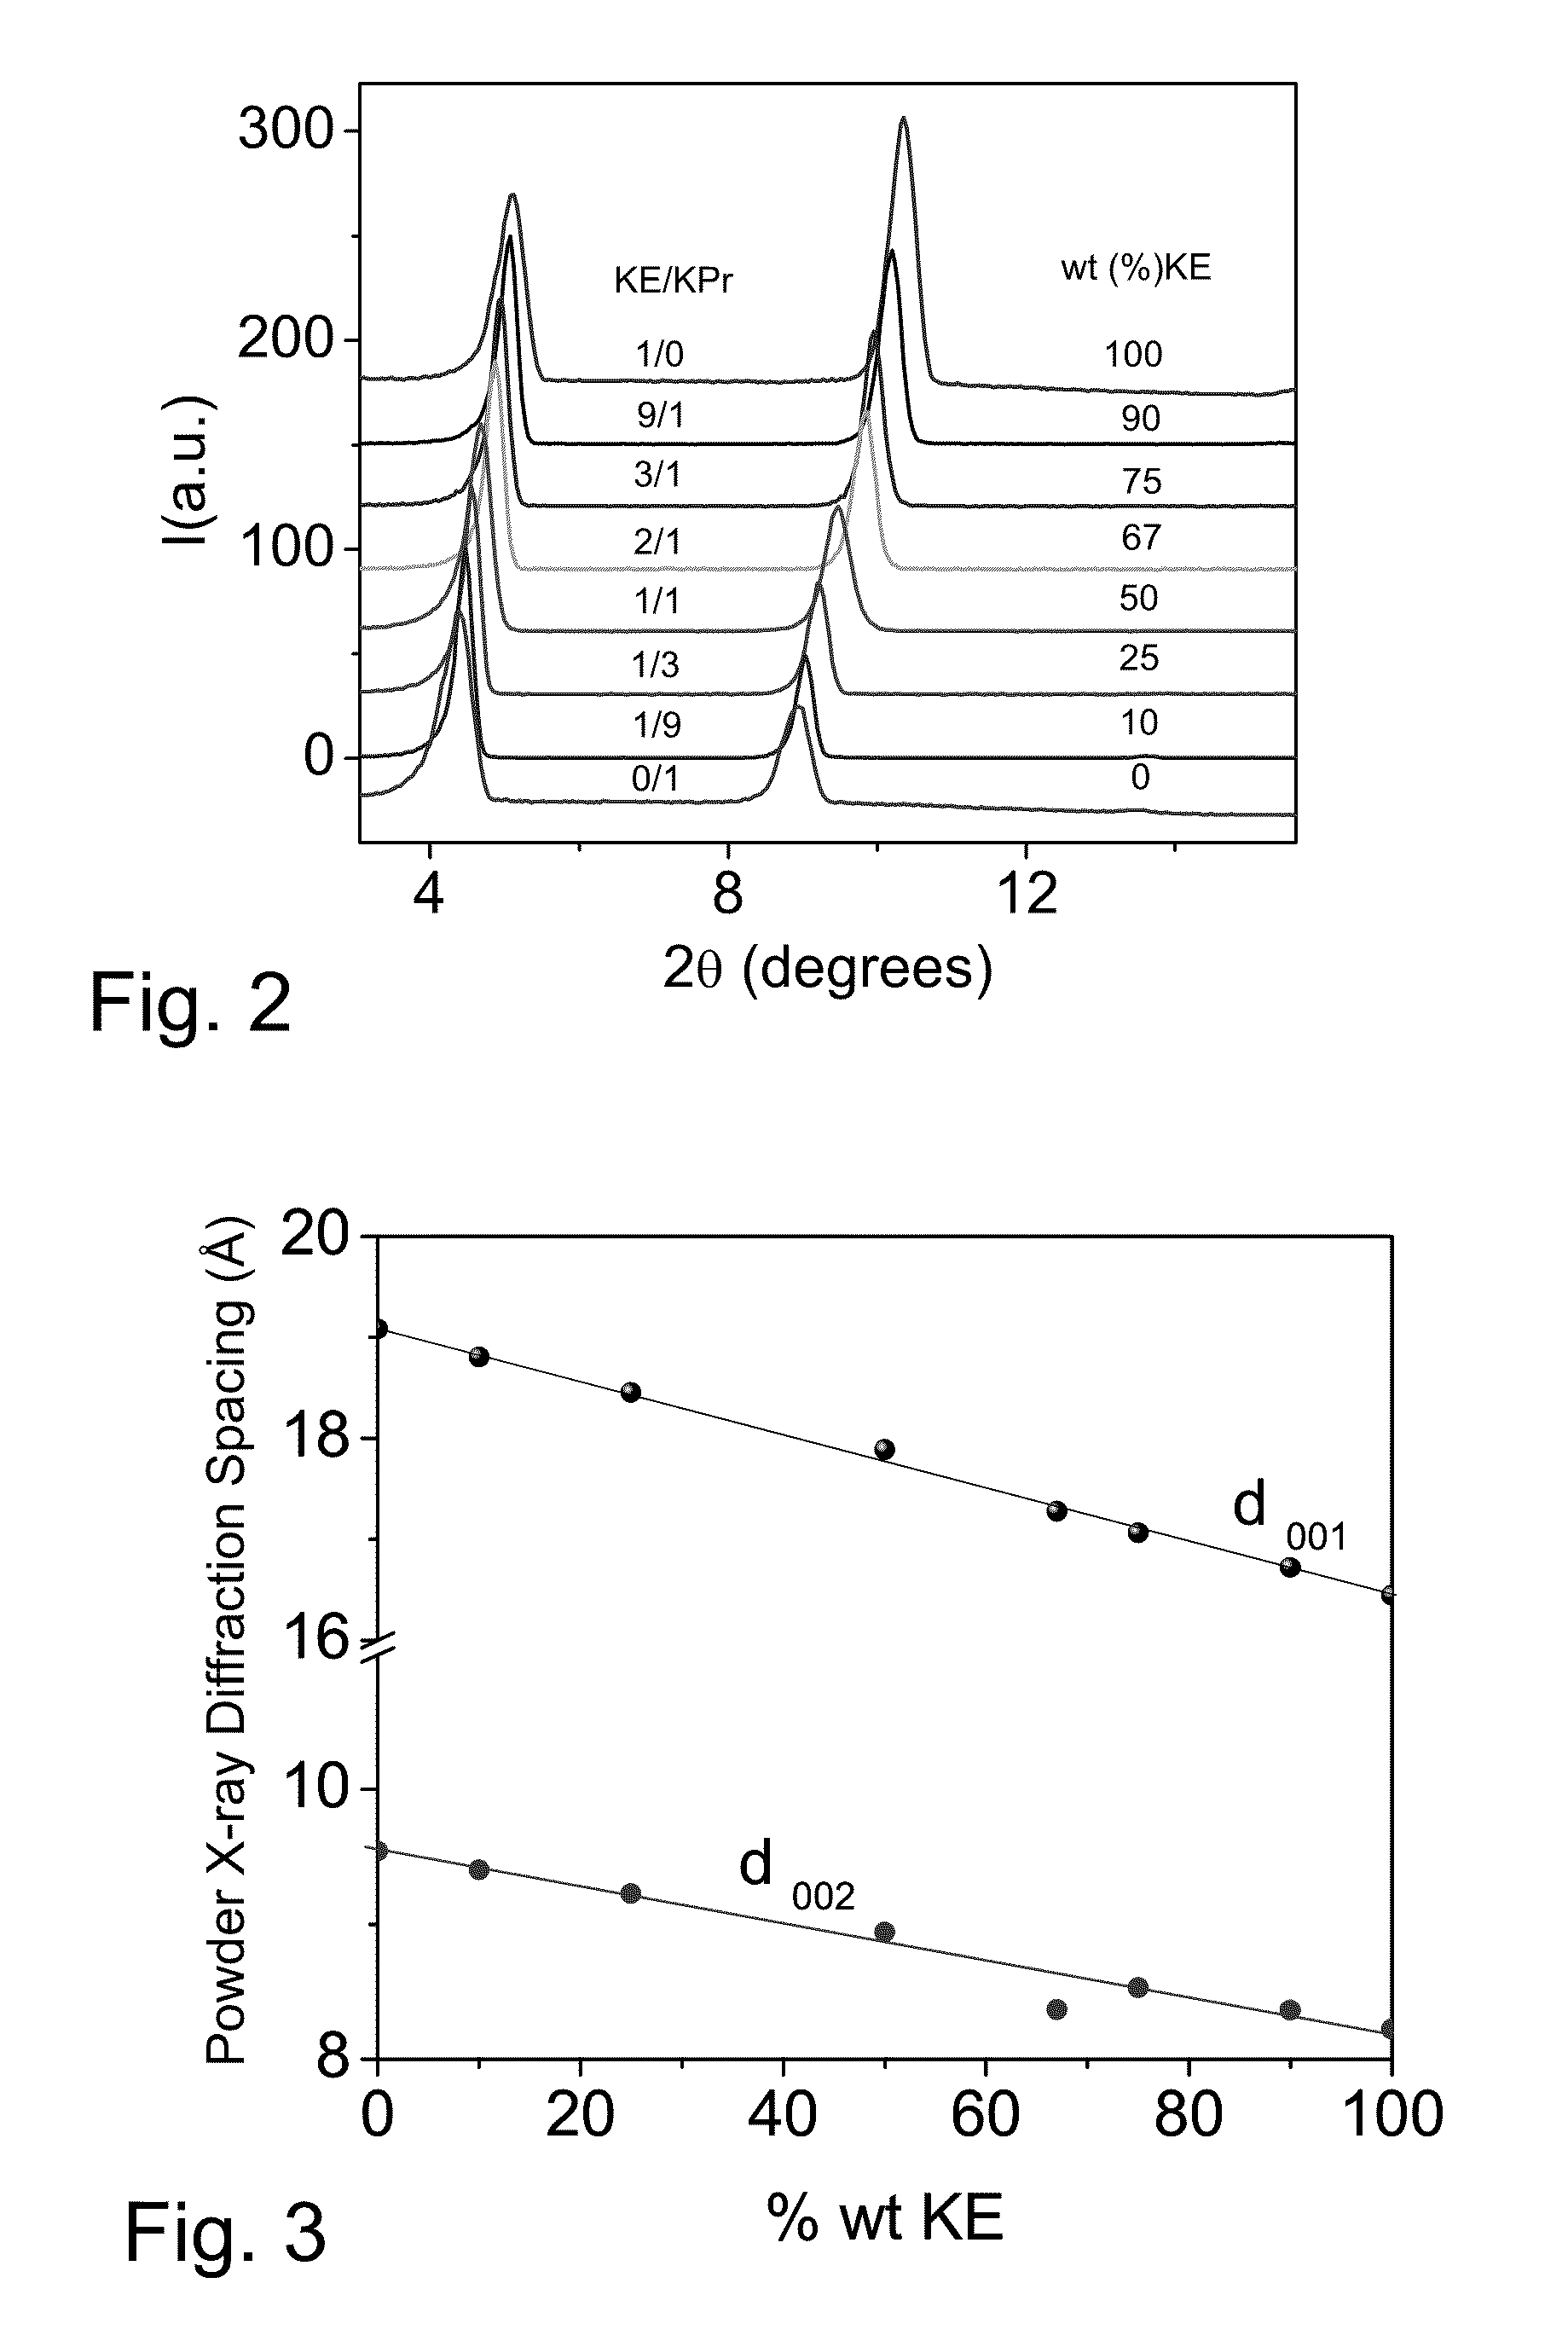 Co-crystallizable diacetylenic monomer compositions, crystal phases and mixtures, and related methods